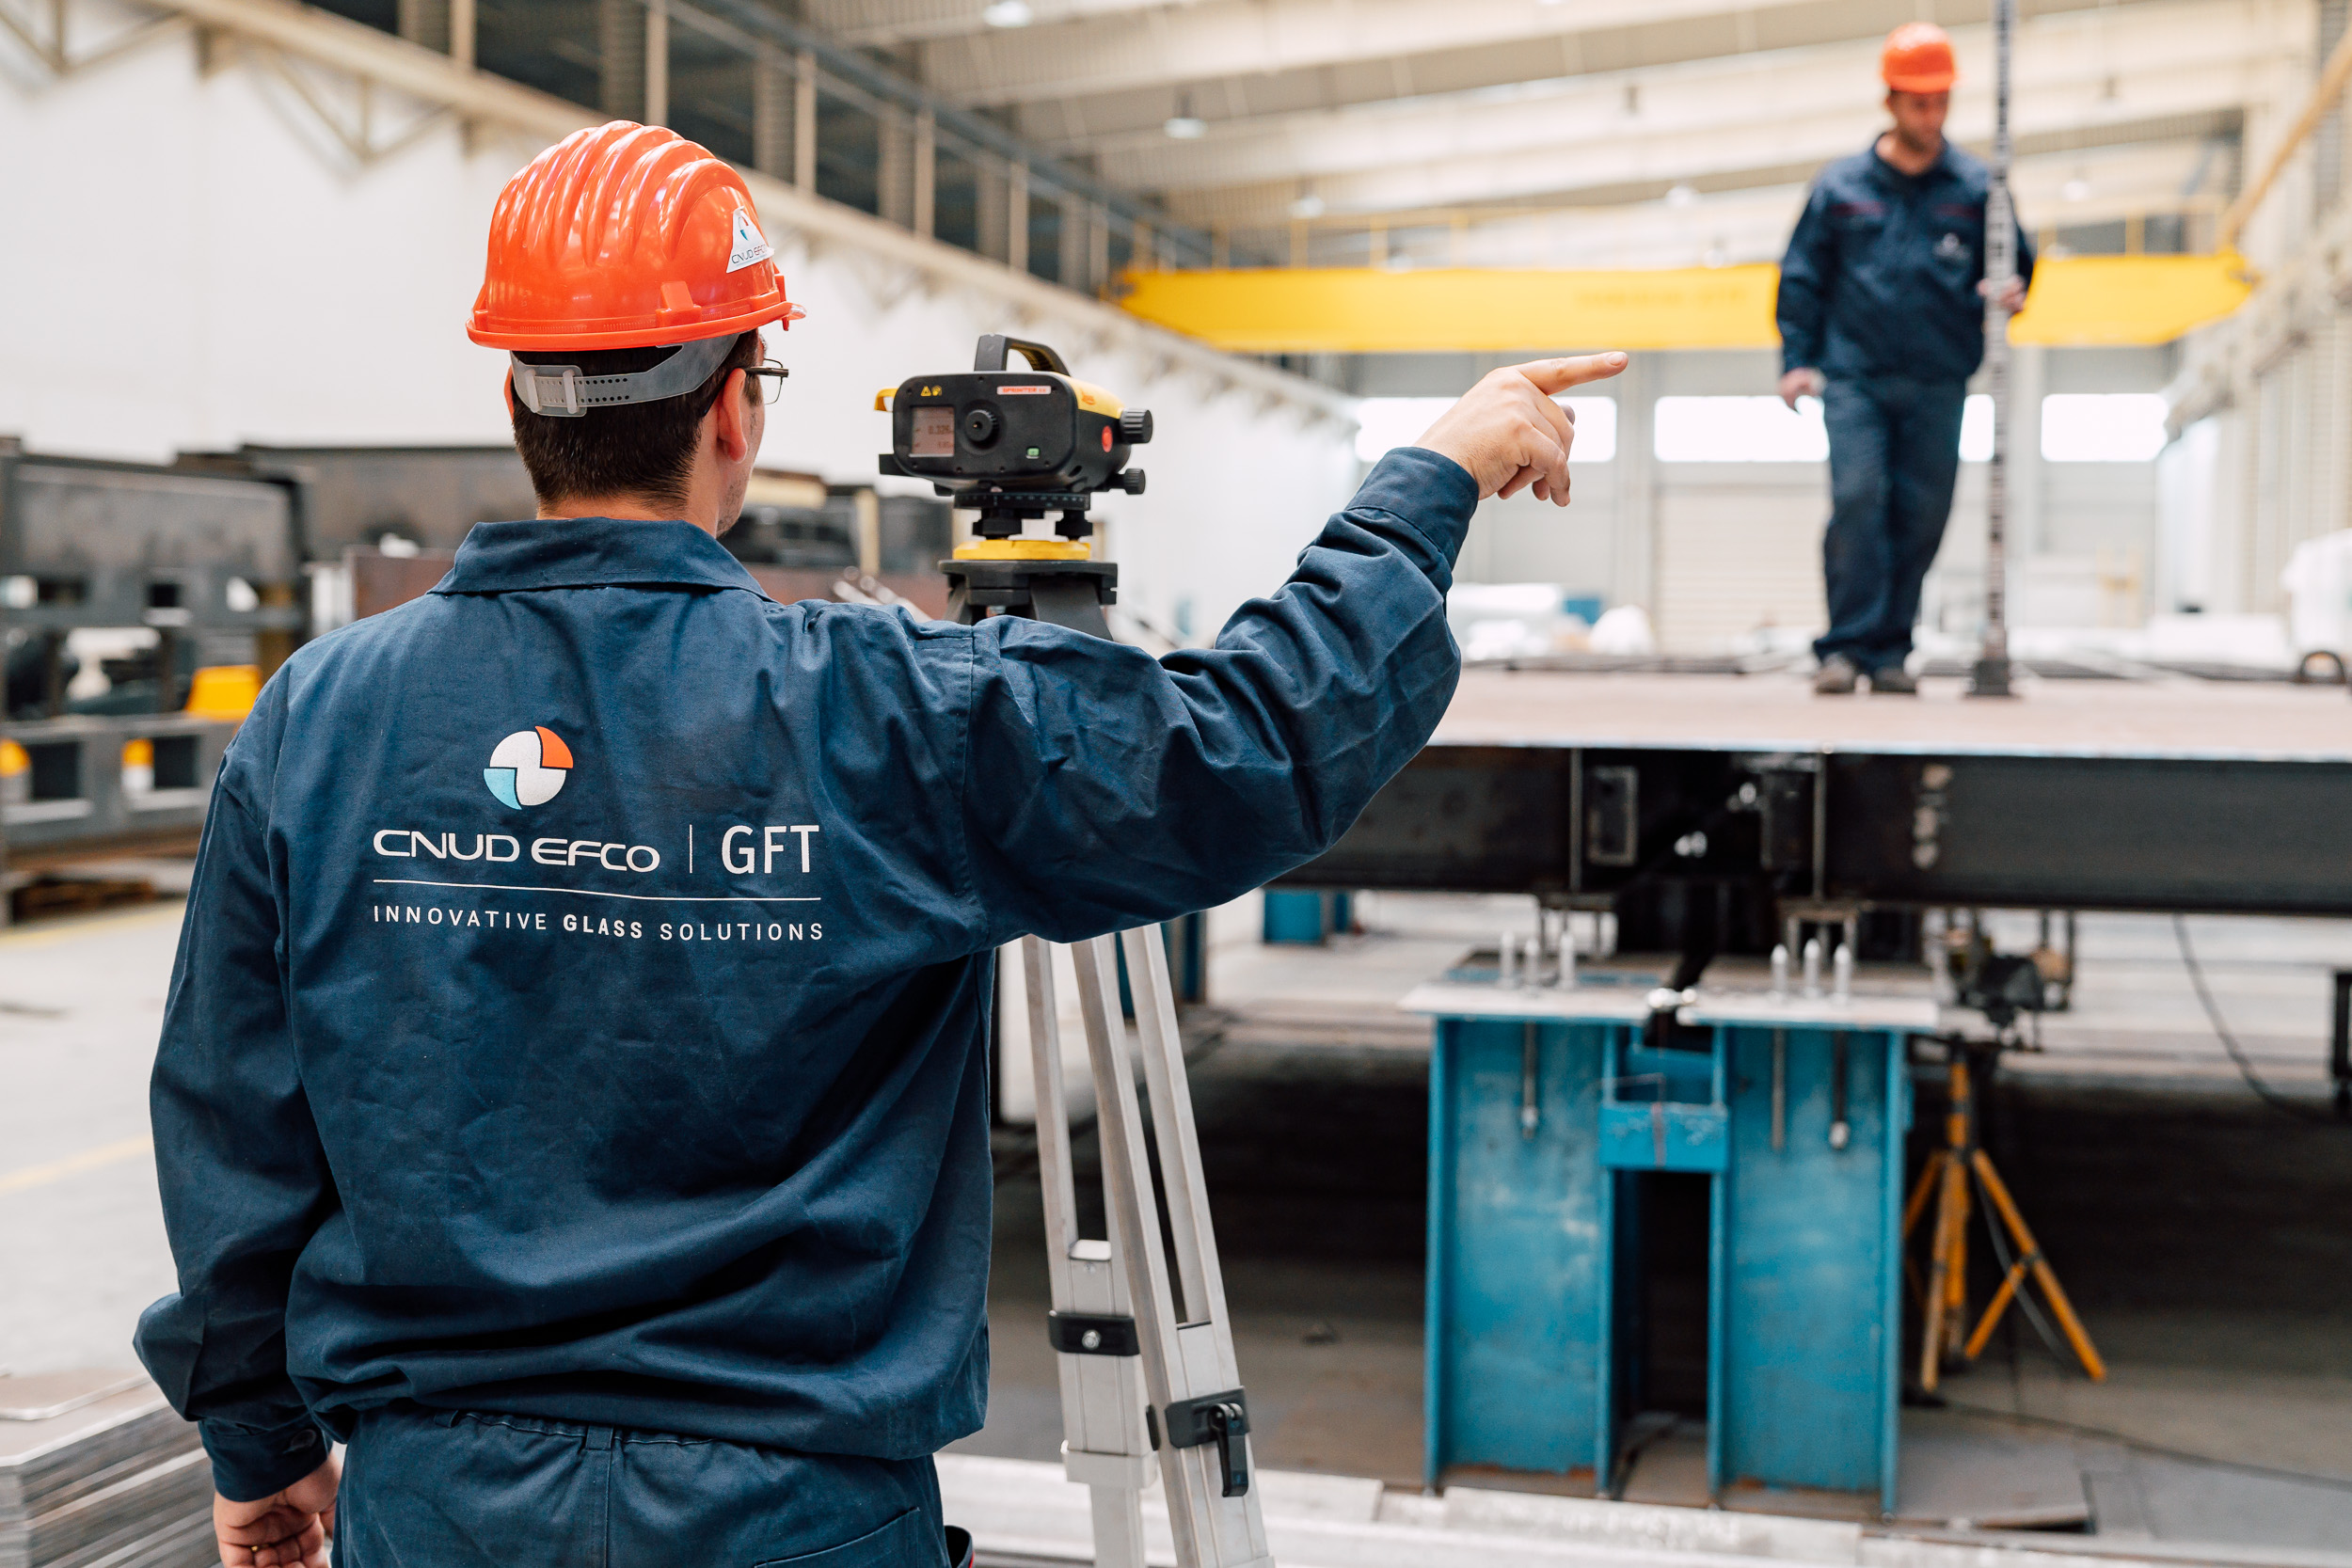 CNUD EFCO GFT has become part of the Grenzebach Group